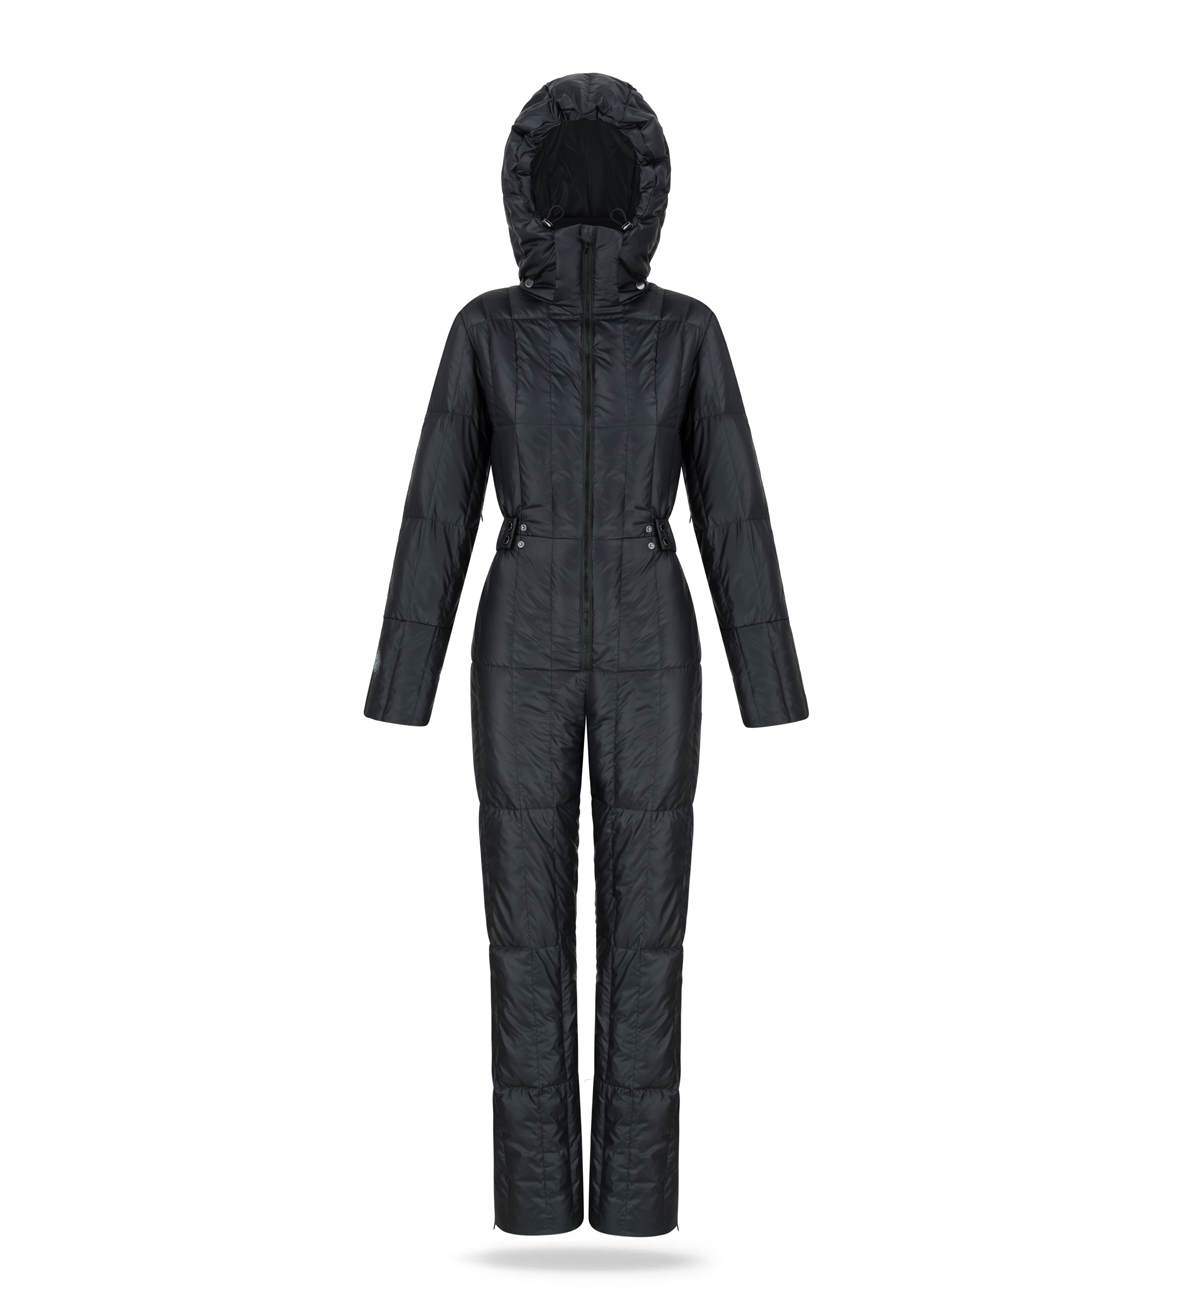 winter women snowsuit in black colour with hood and waistband